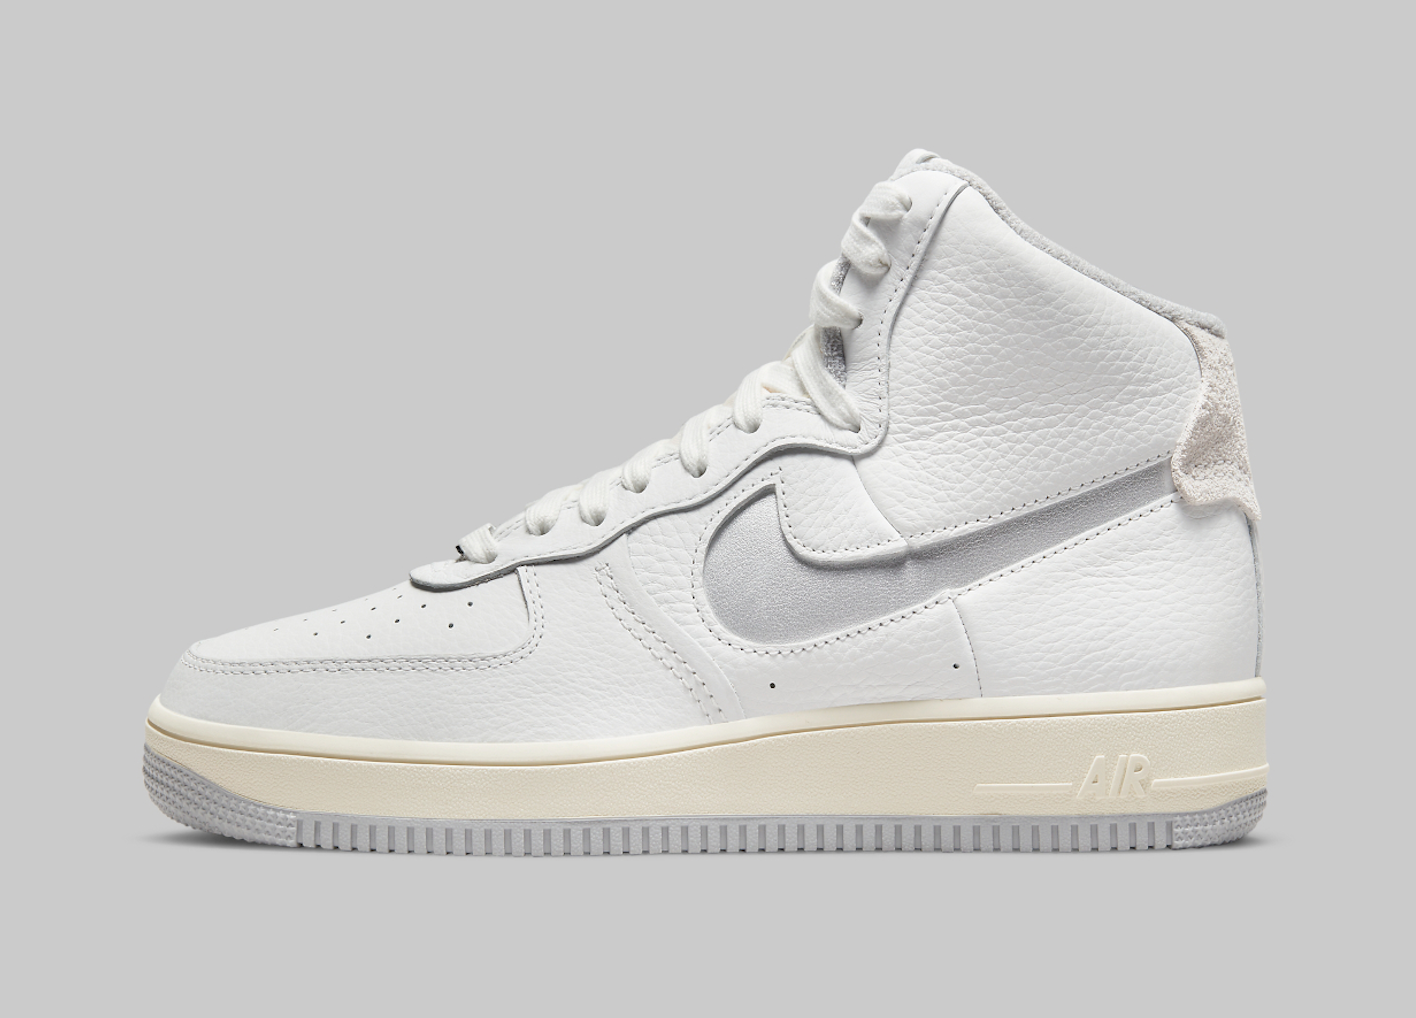 Nike Air Force 1 '07 LV8 White Grey for Sale, Authenticity Guaranteed